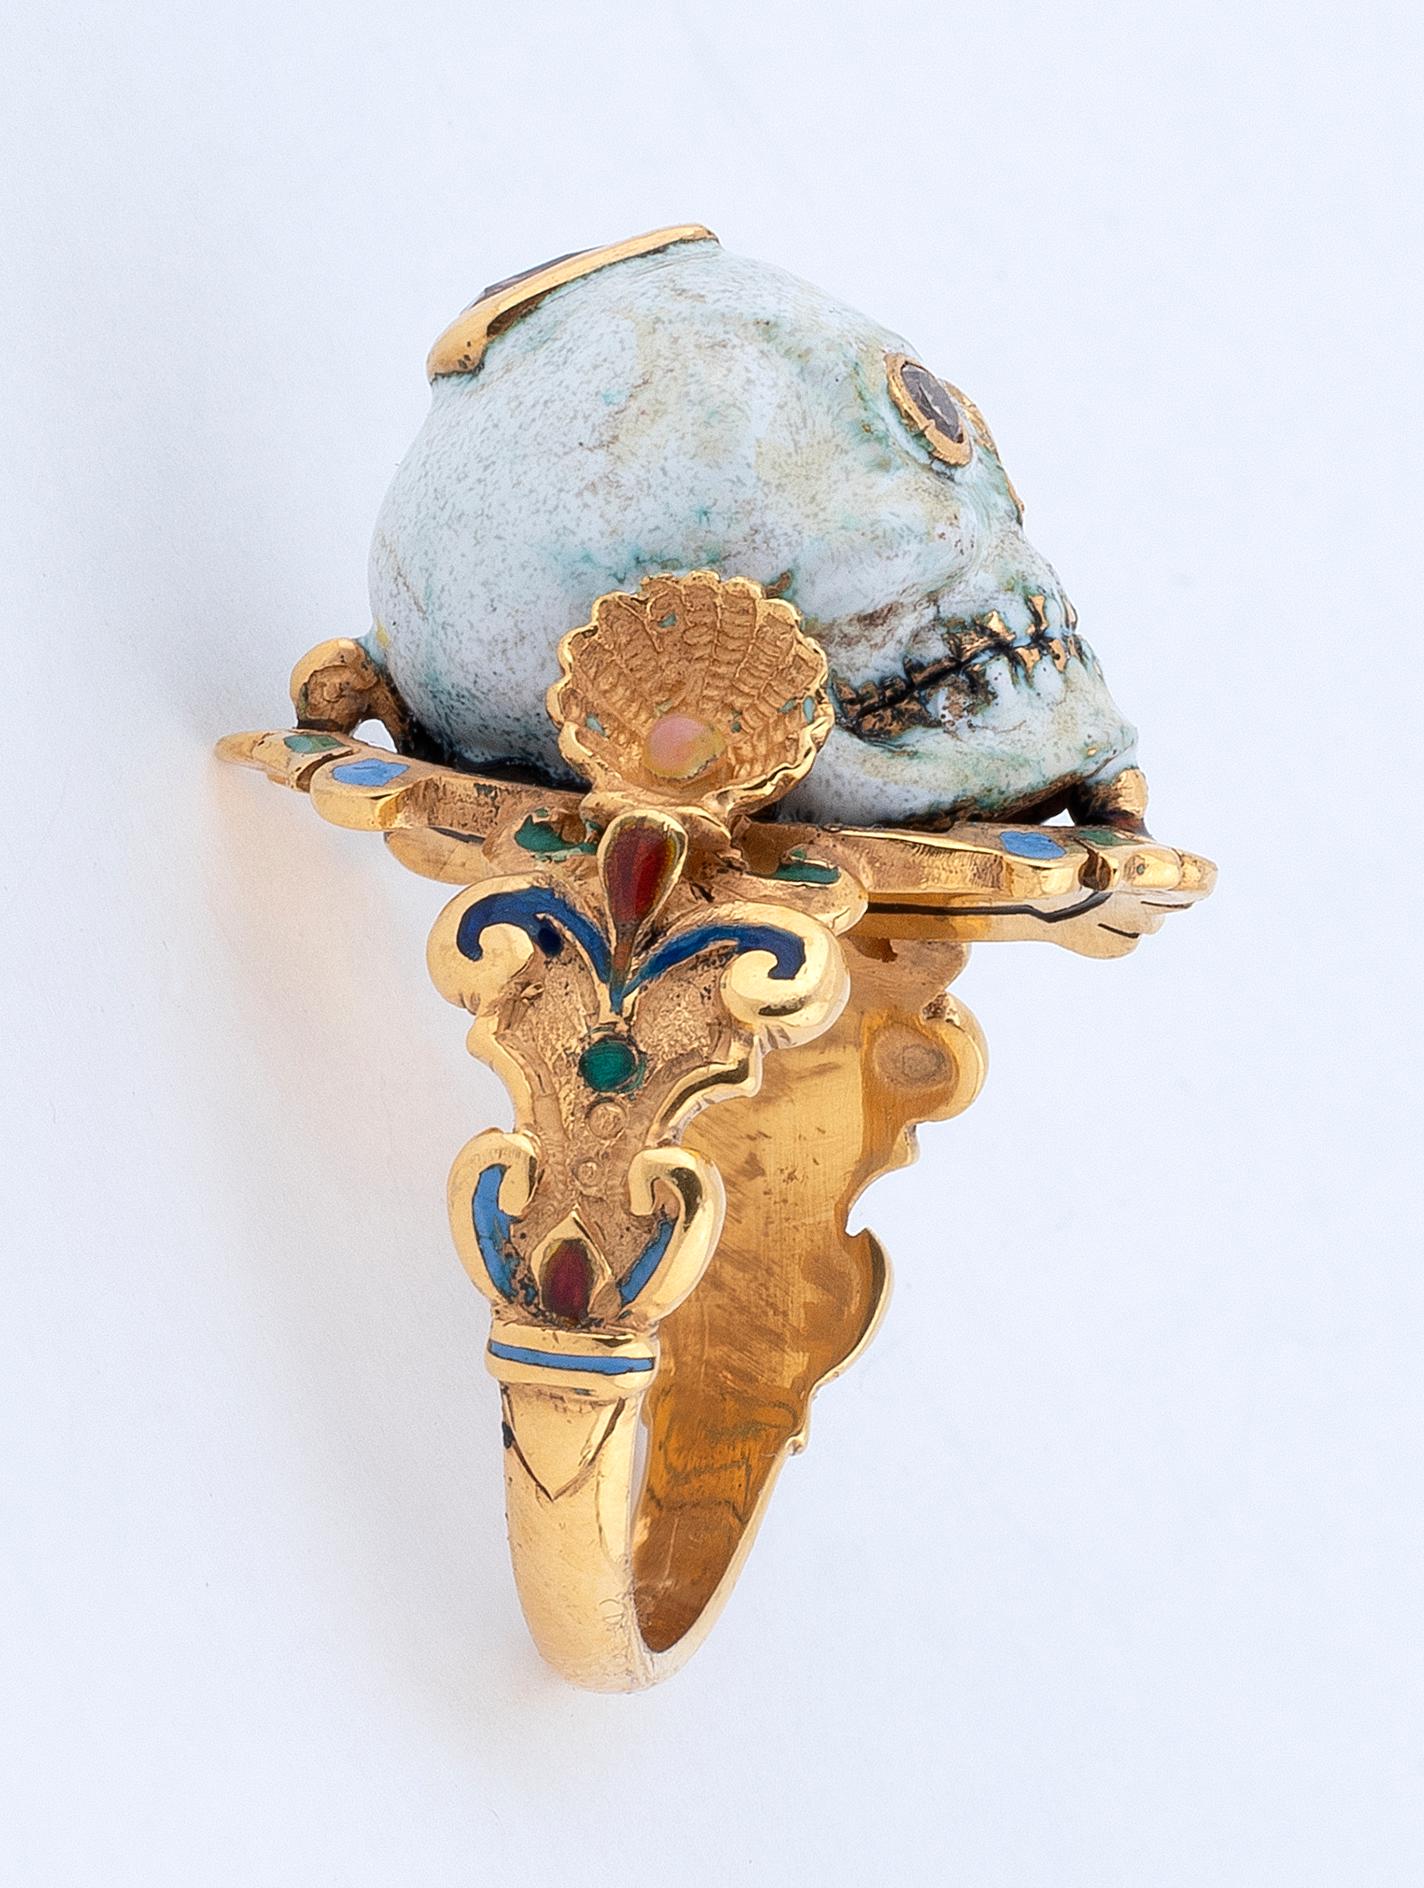 The Renaissance style Memento Mori skull with champleve multicolored enamels, round cut diamonds eyes and pear cut diamond at the top.
Mounted in 18Kt yellow gold
Signed A. Codognato Venezia
Weight: 15.8 gr
Finger size: 9 1/2